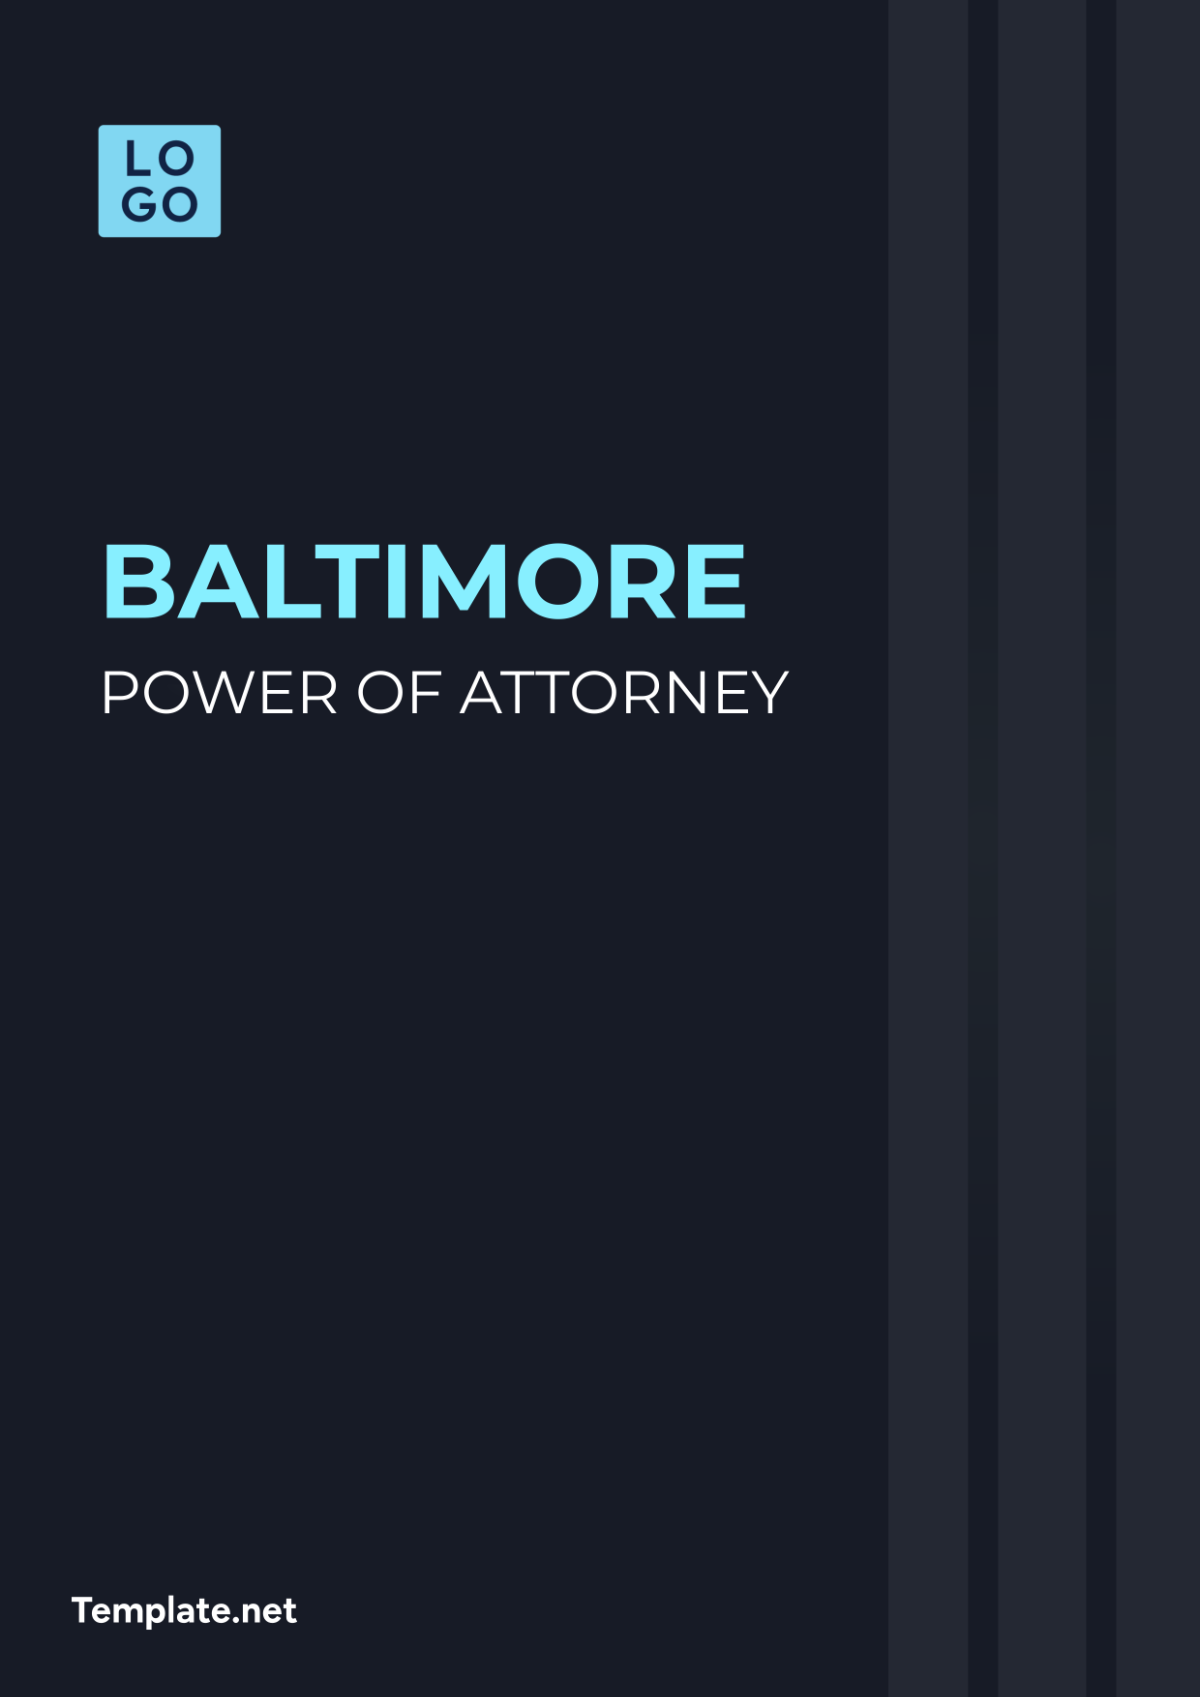 Baltimore Power of Attorney Template